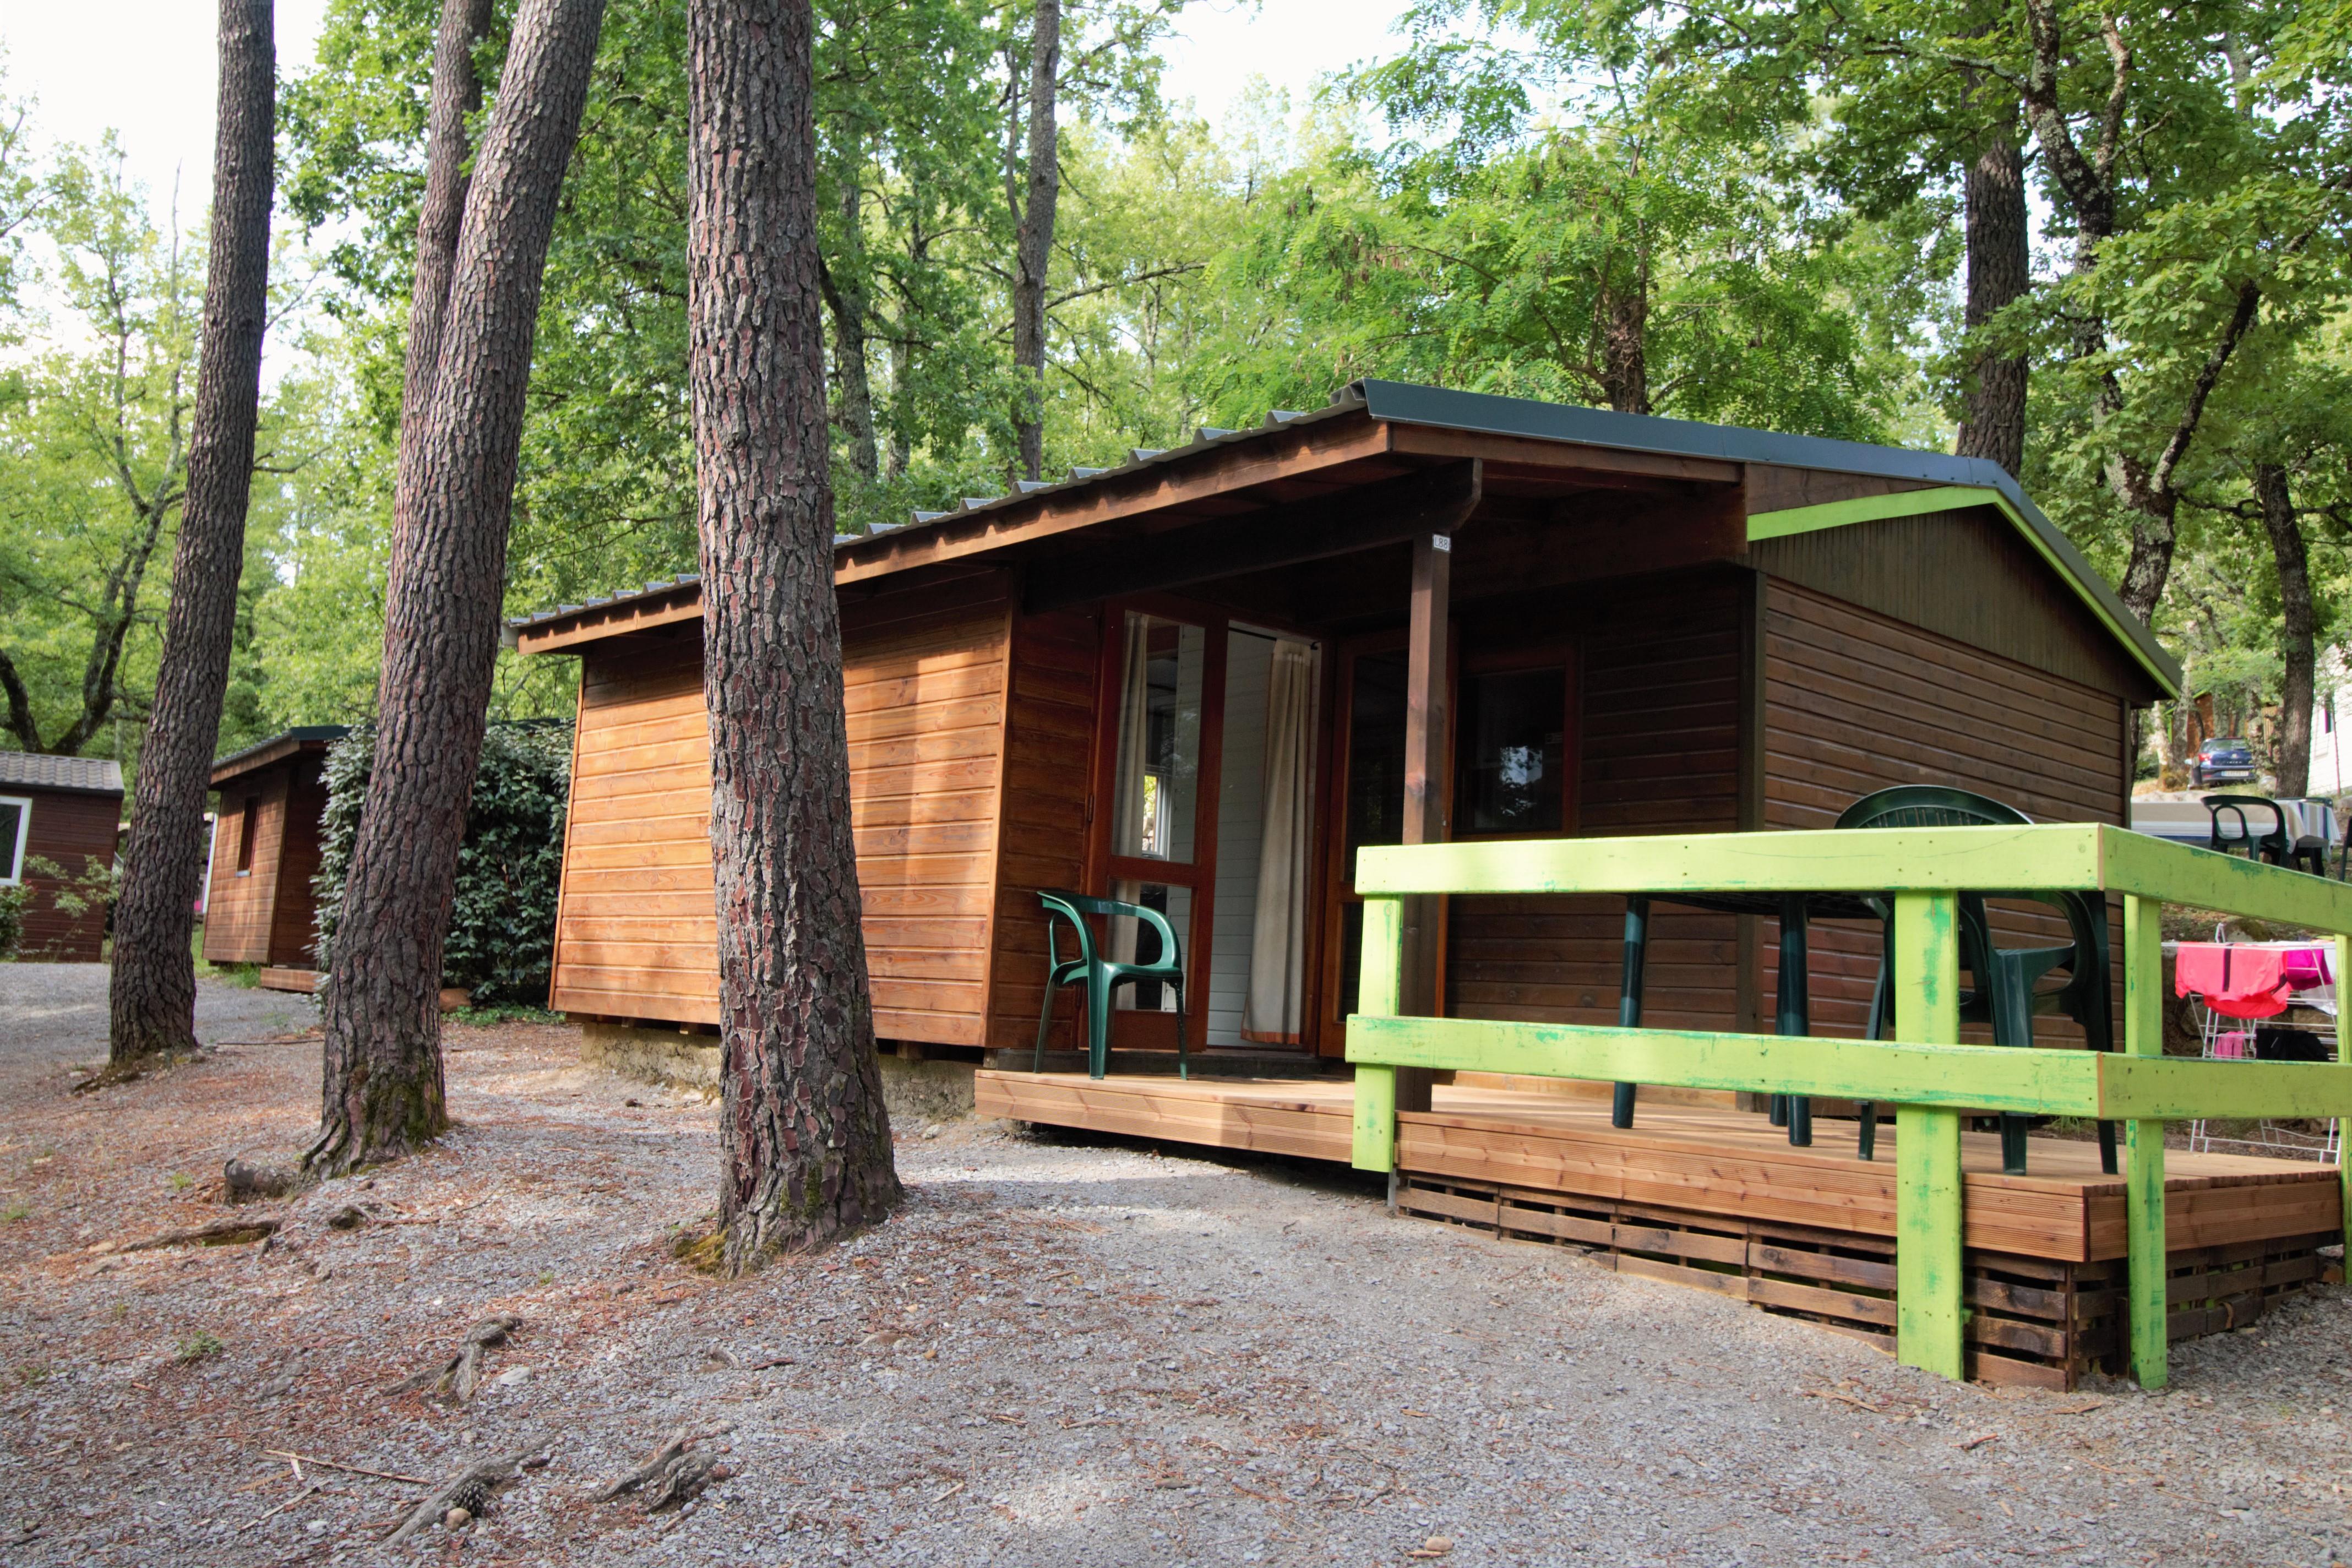 Accommodation - Chalet Les Blaches - Camping les Blaches Locations